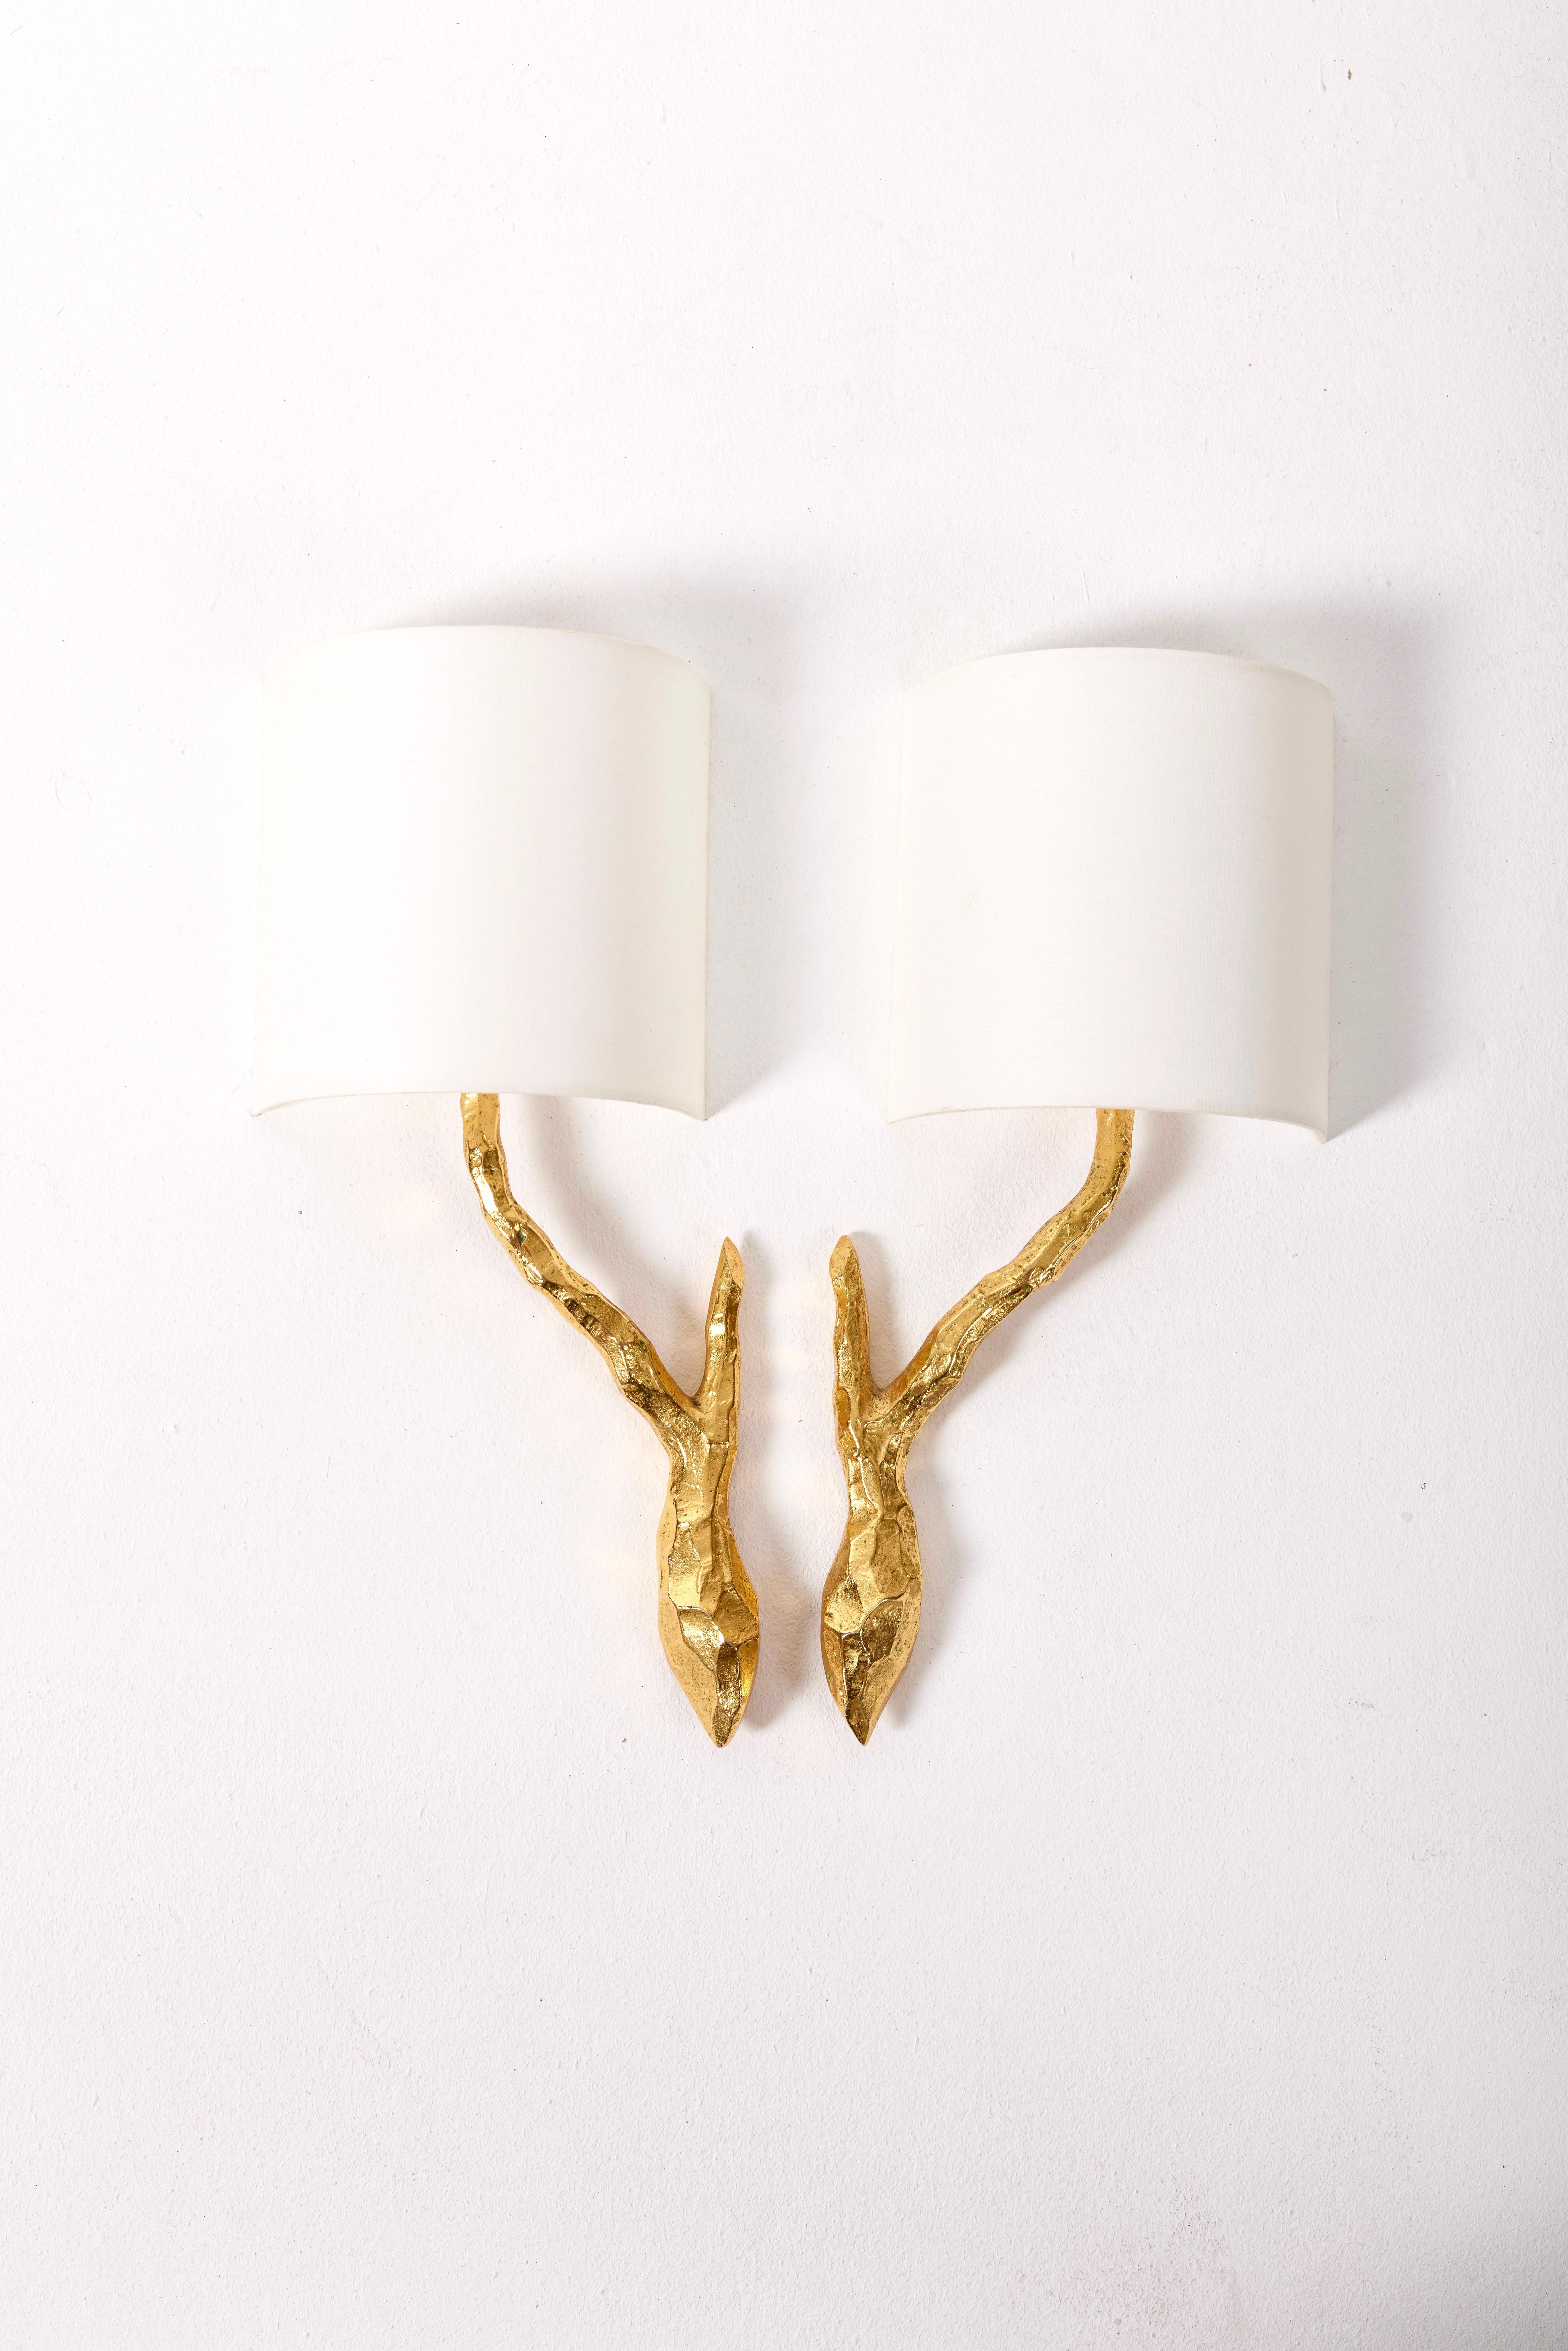 Pair of gilded bronze wall sconces from Maison Arlus, dating from the 1960s. White lampshades. Very good condition.
LP1266